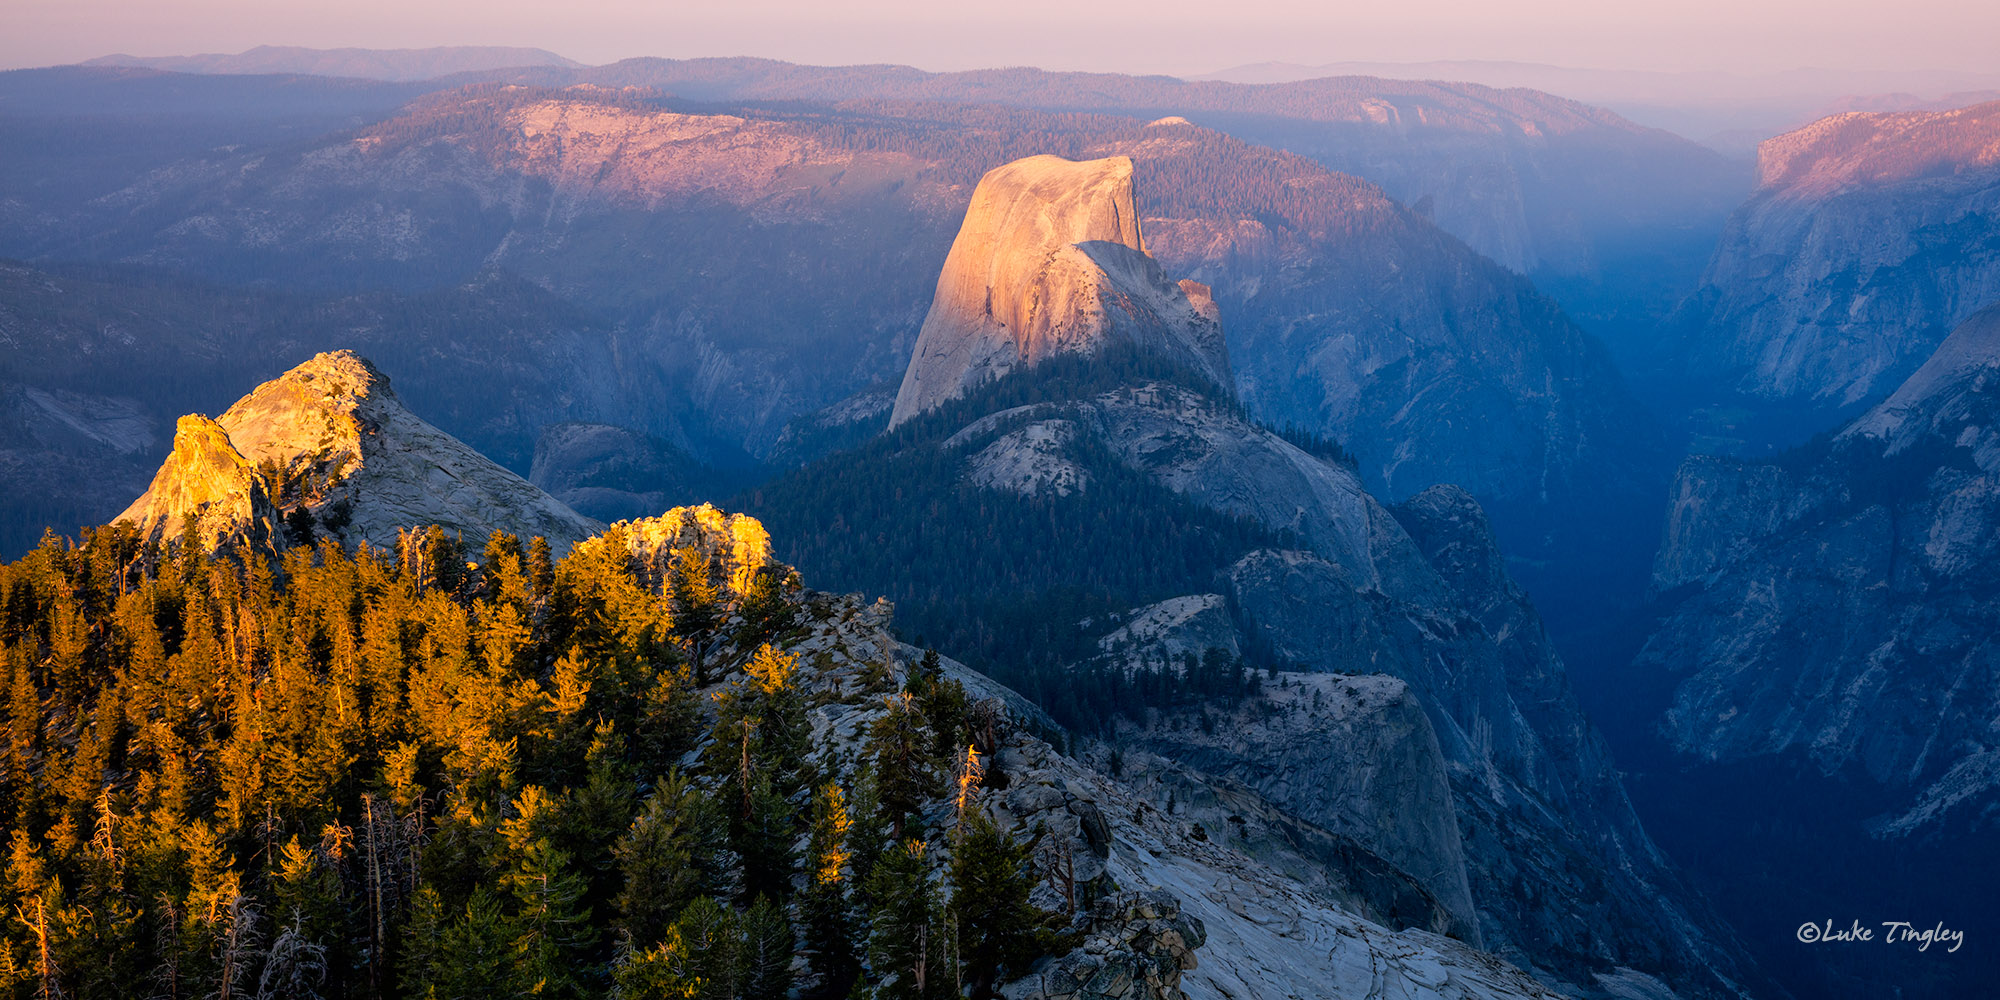 Looking down on Half Dome at sunrise.